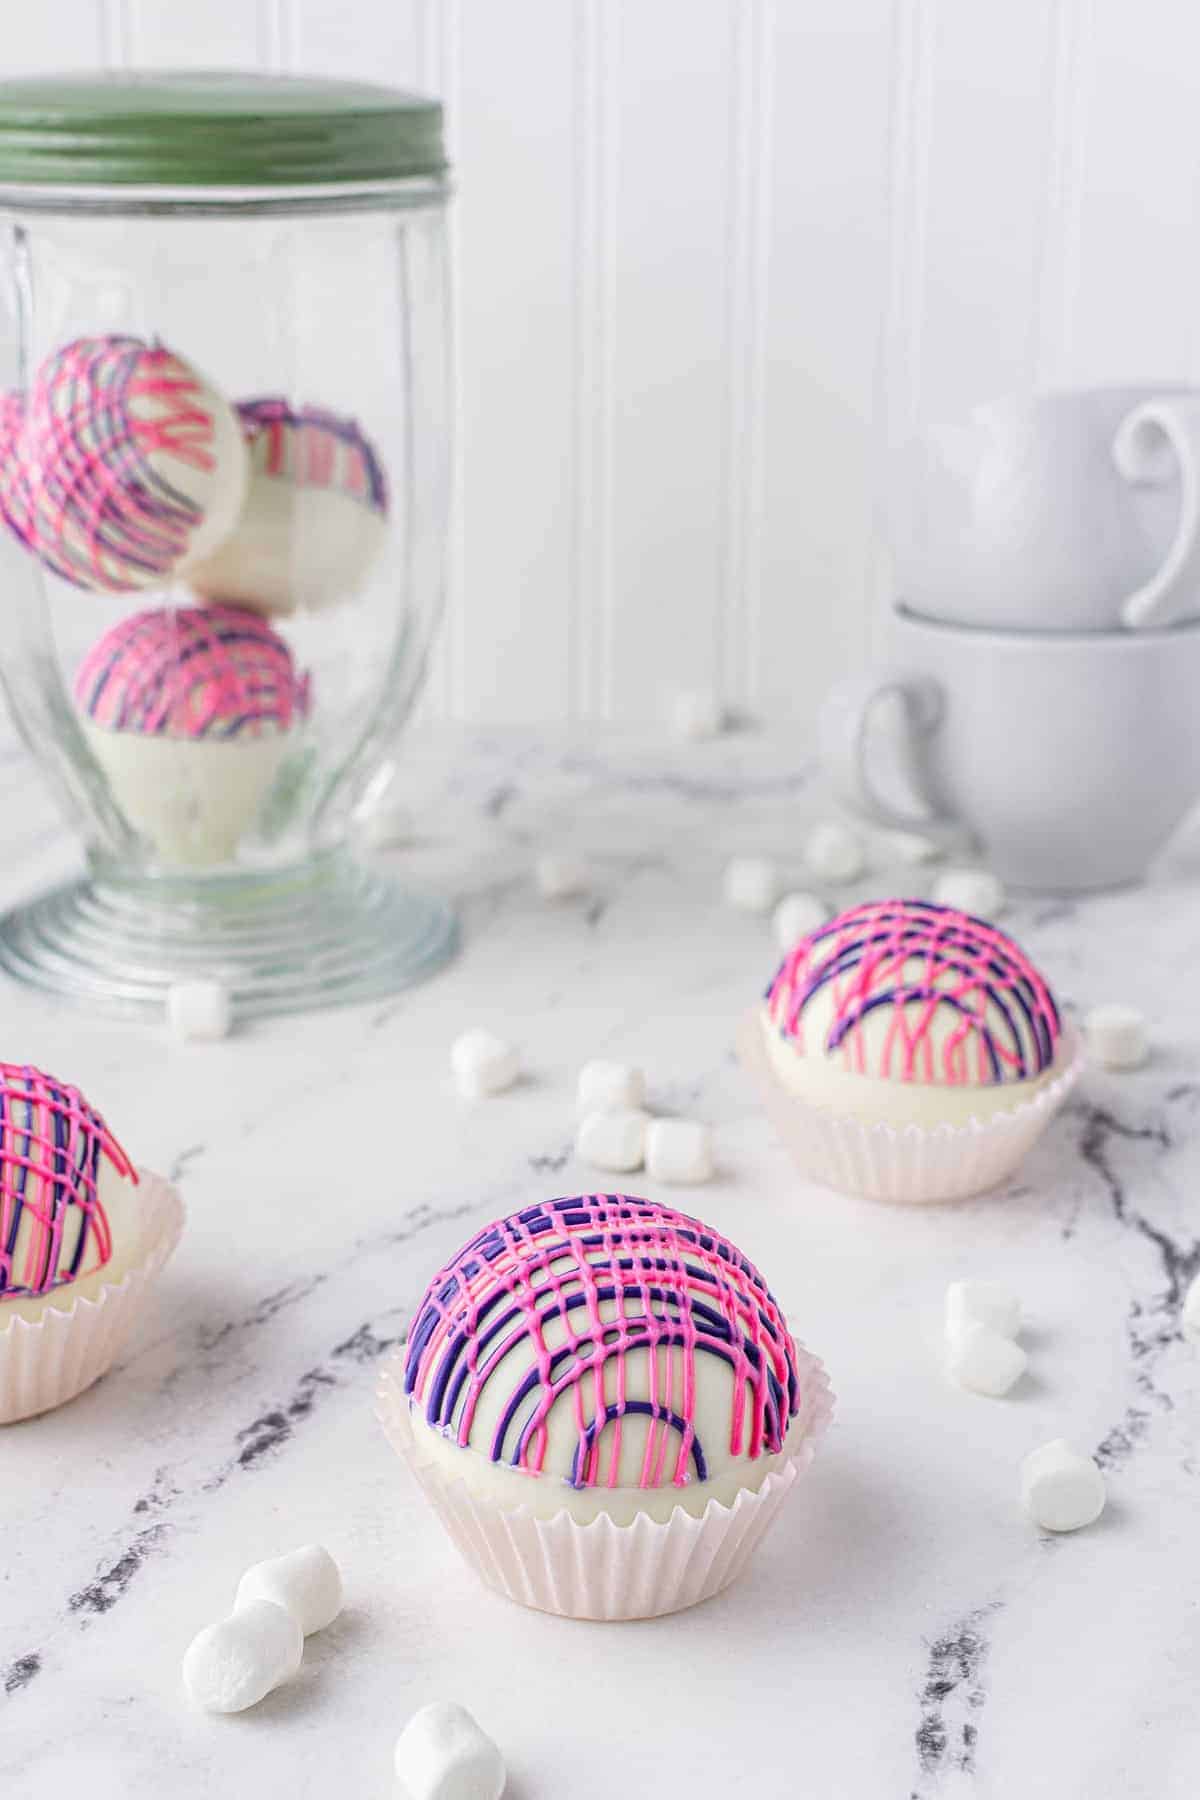 Pink, white, and purple chocolate spheres in the foreground, jar of more in the background.